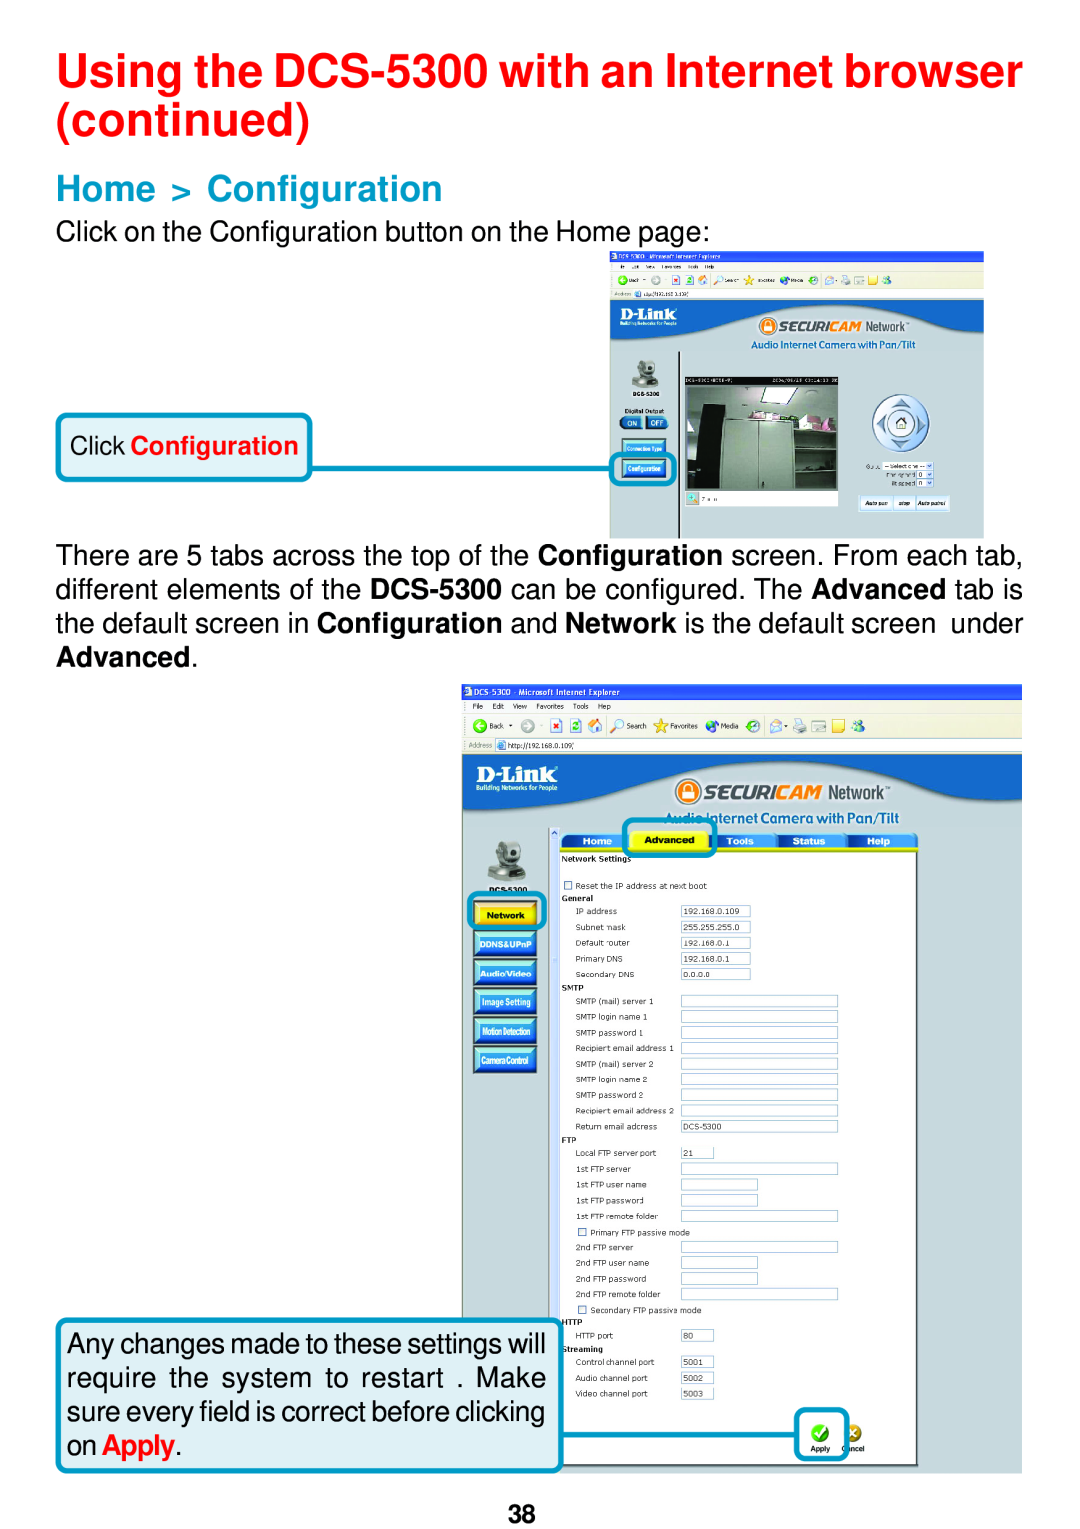 D-Link manual Home Configuration, Using the DCS-5300 with an Internet browser continued 